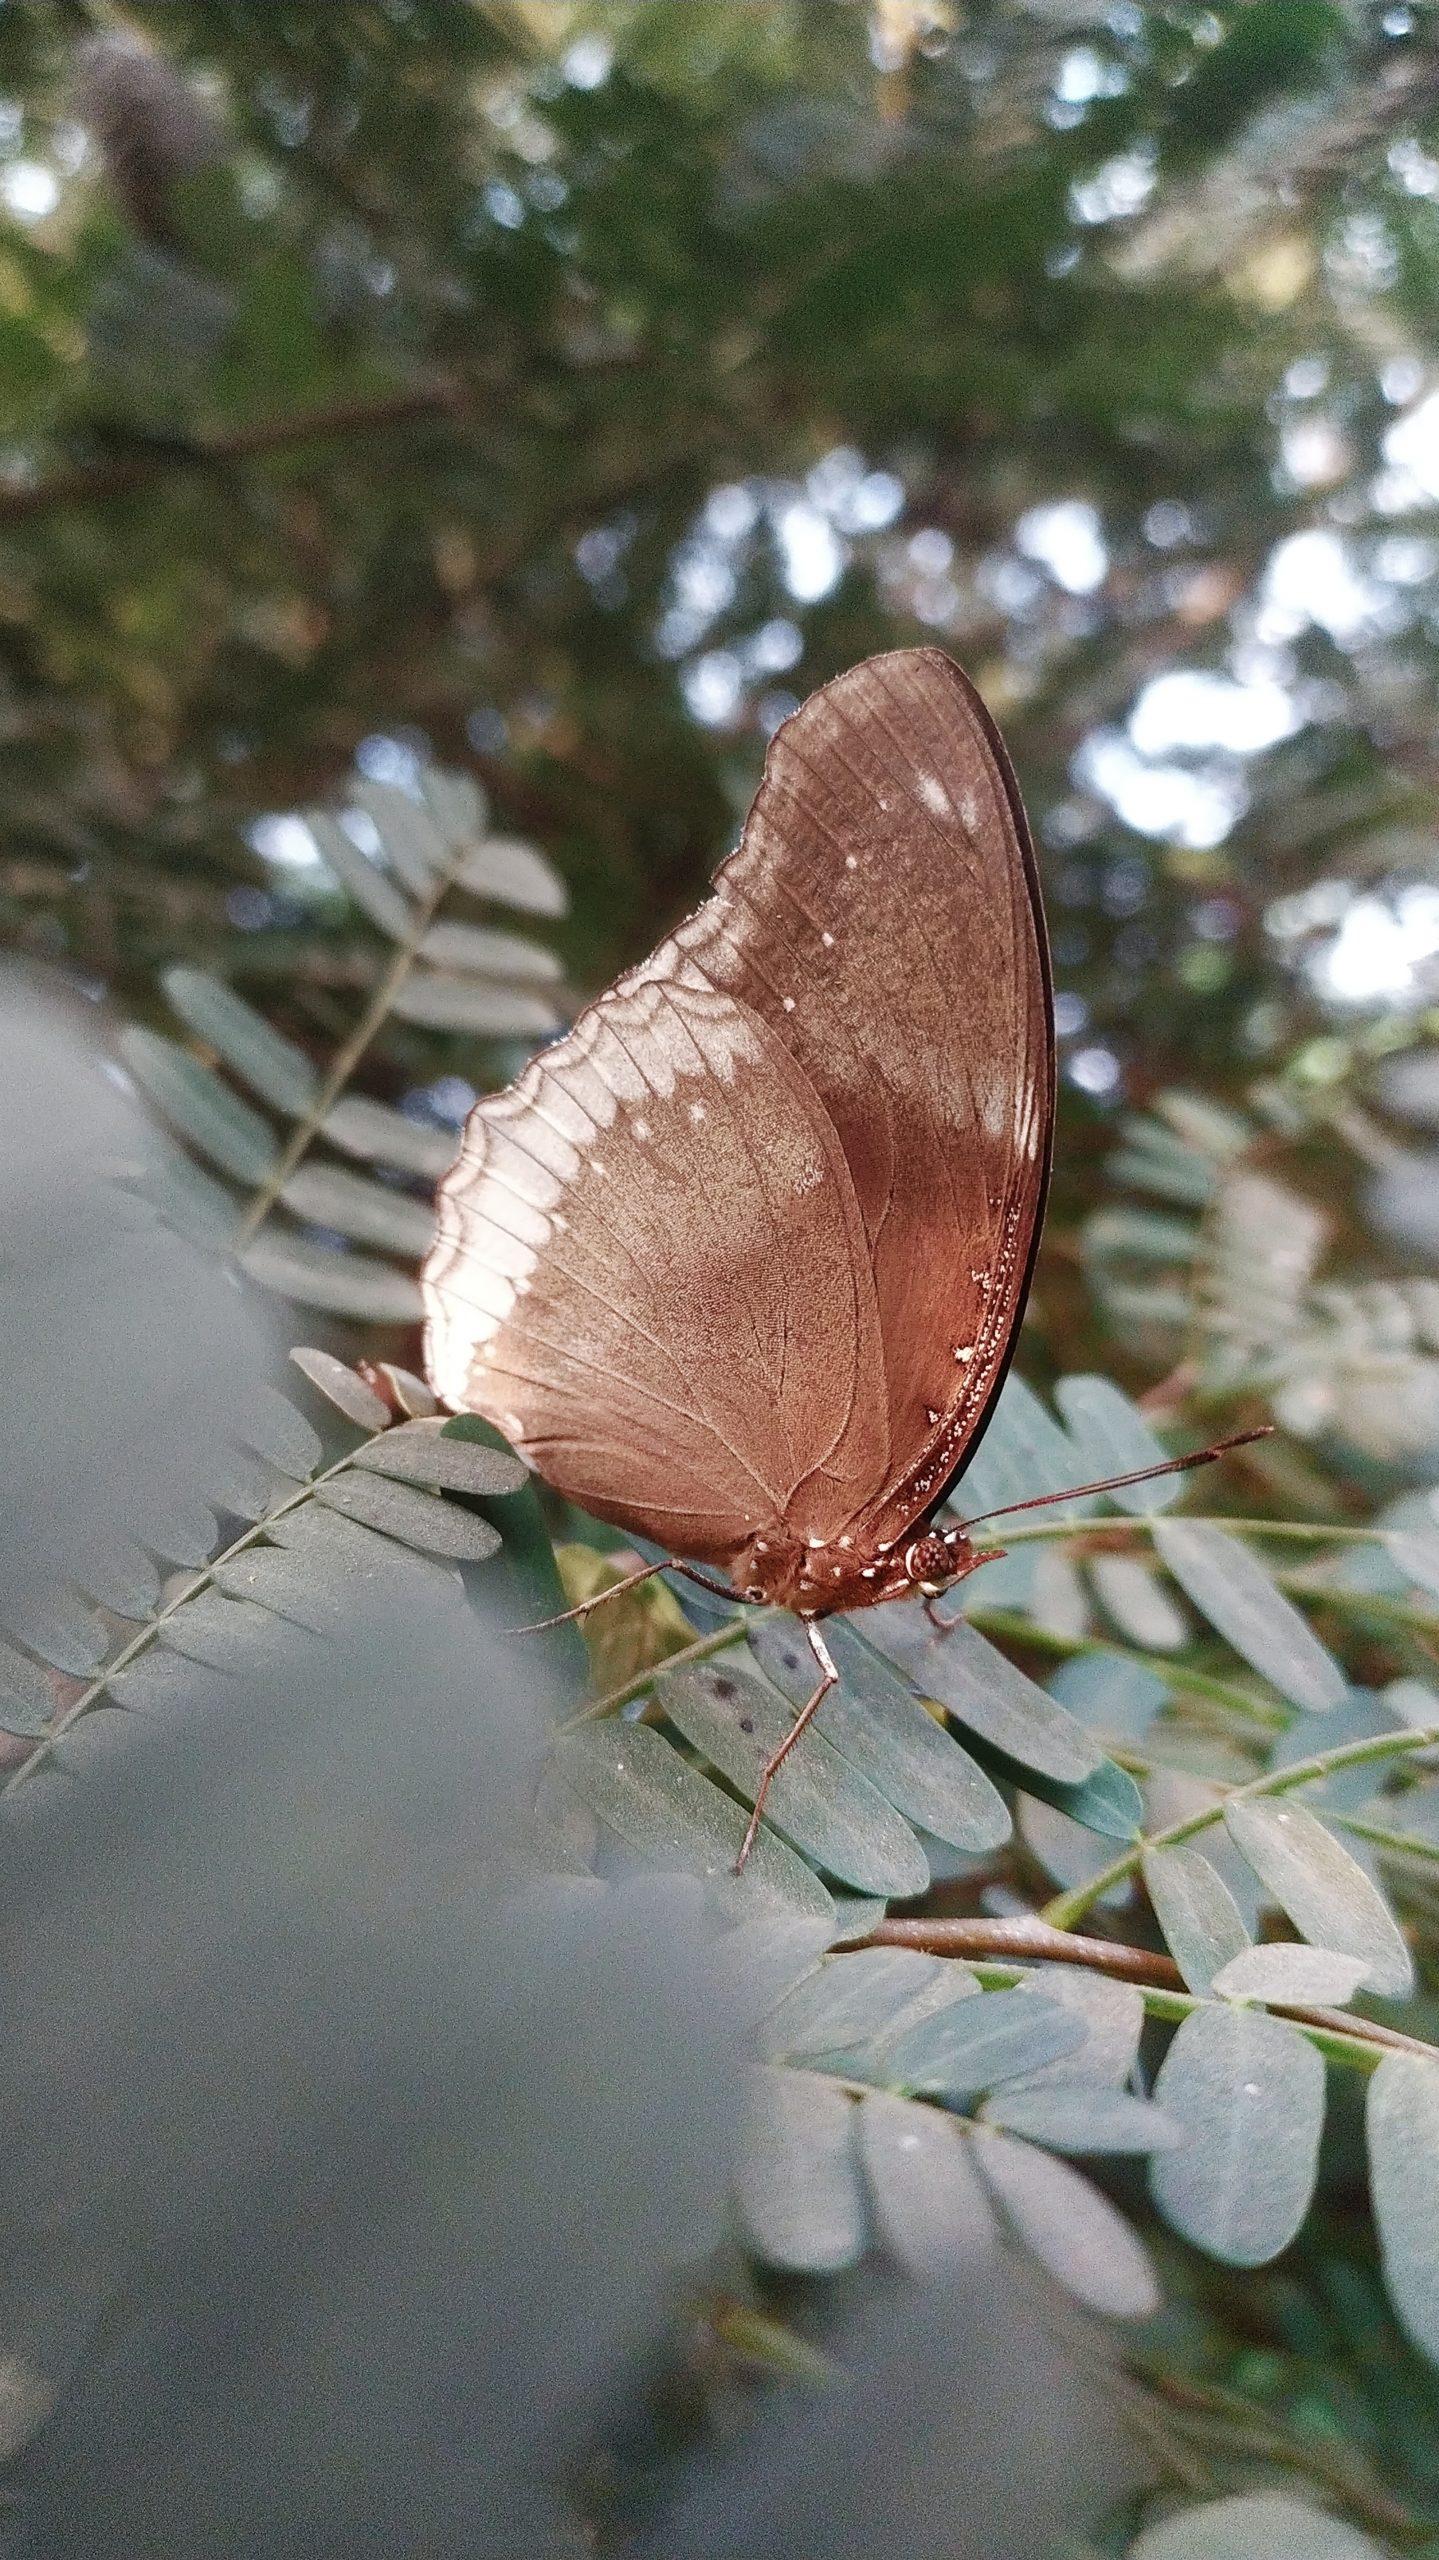 A butterfly on leaves